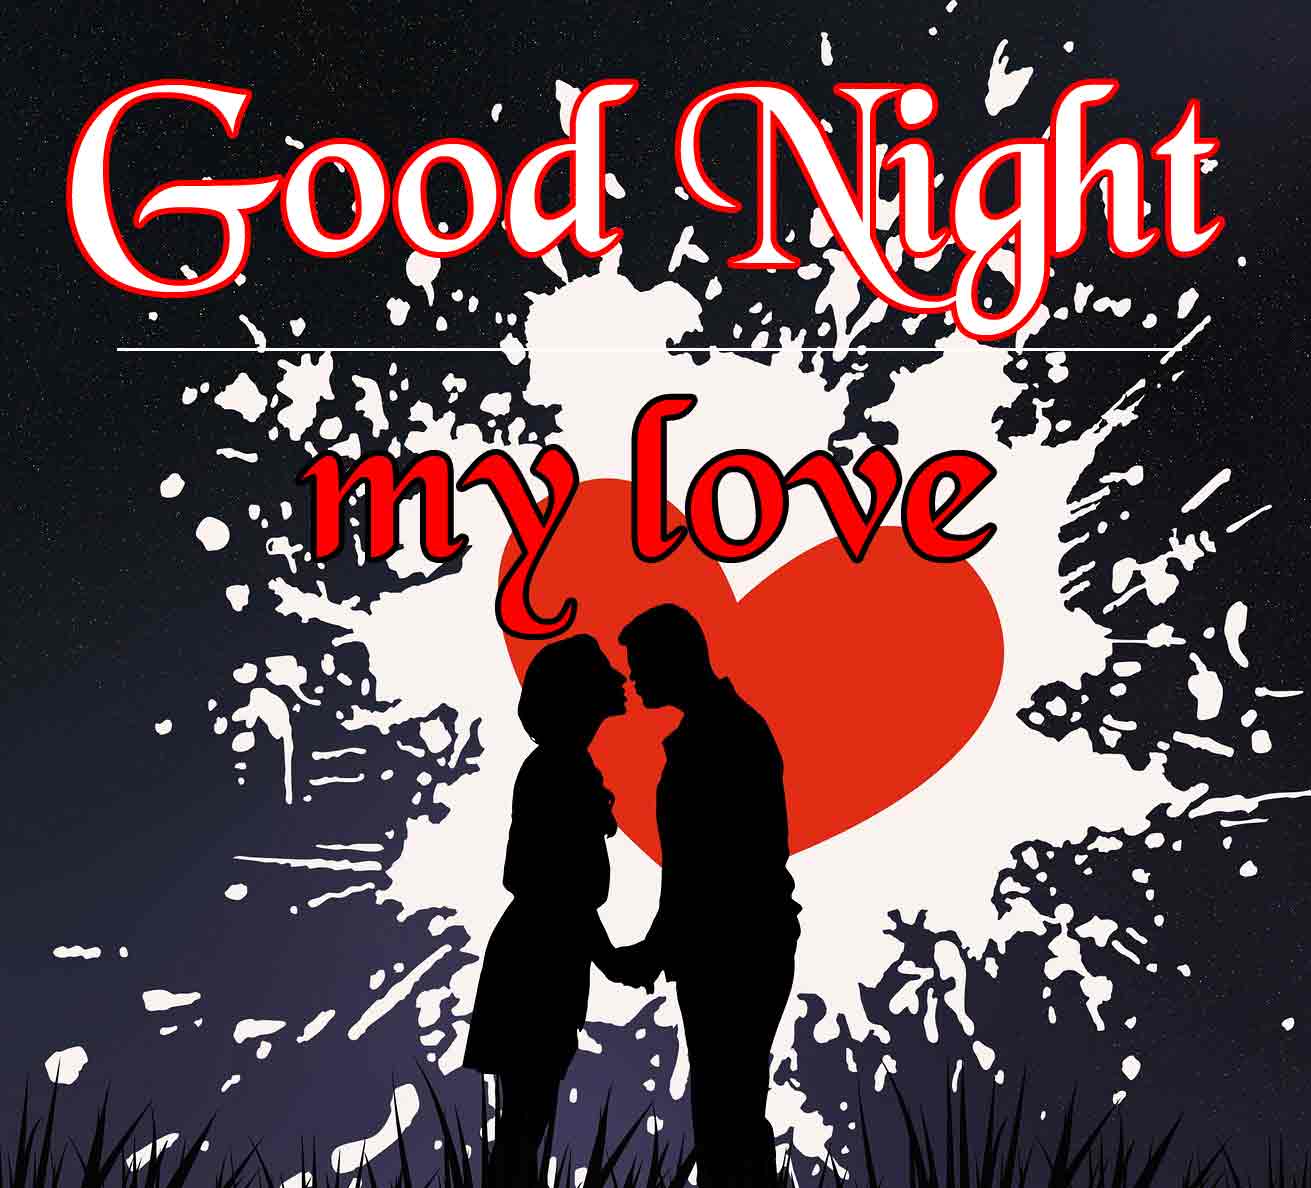 Couple Free Good Night Wallpaper Images Download 